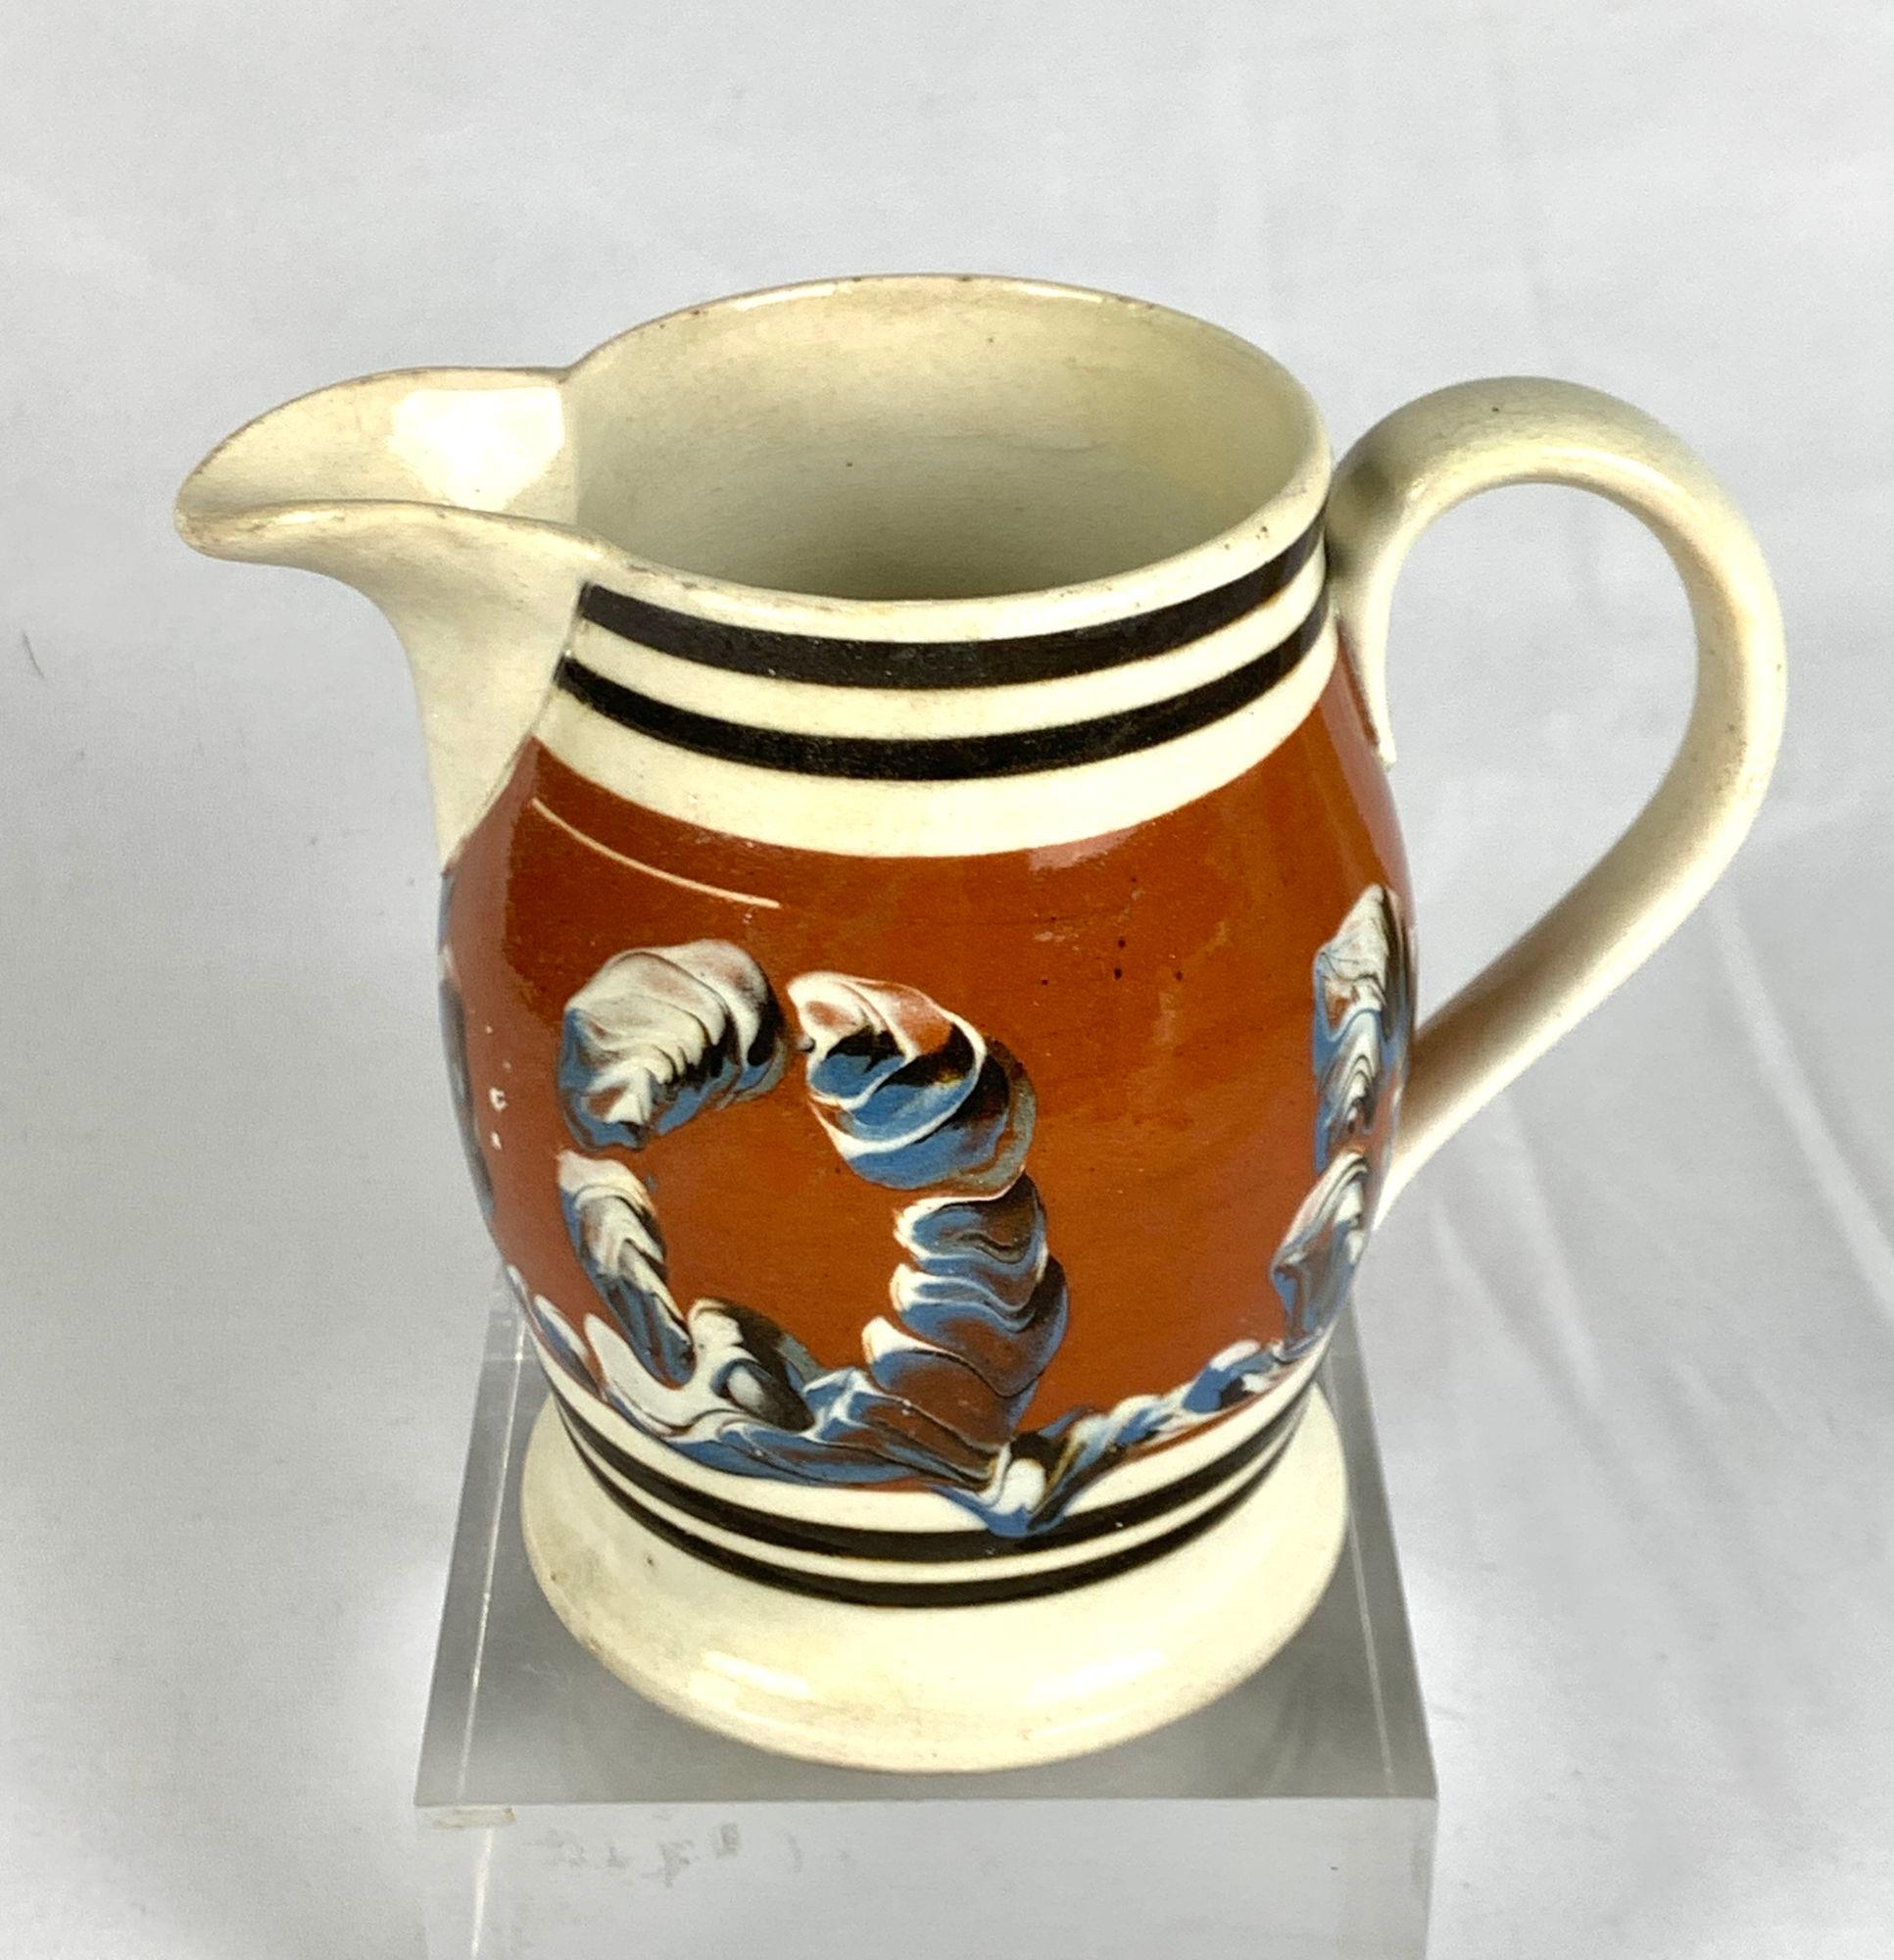 This mochaware pitcher has cable decoration in blue, white, and midnight brown slip on a lovely reddish brown slip ground (see images).
Double bands of midnight brown slip encircle the pitcher above and below the main decoration.
Crafted in England